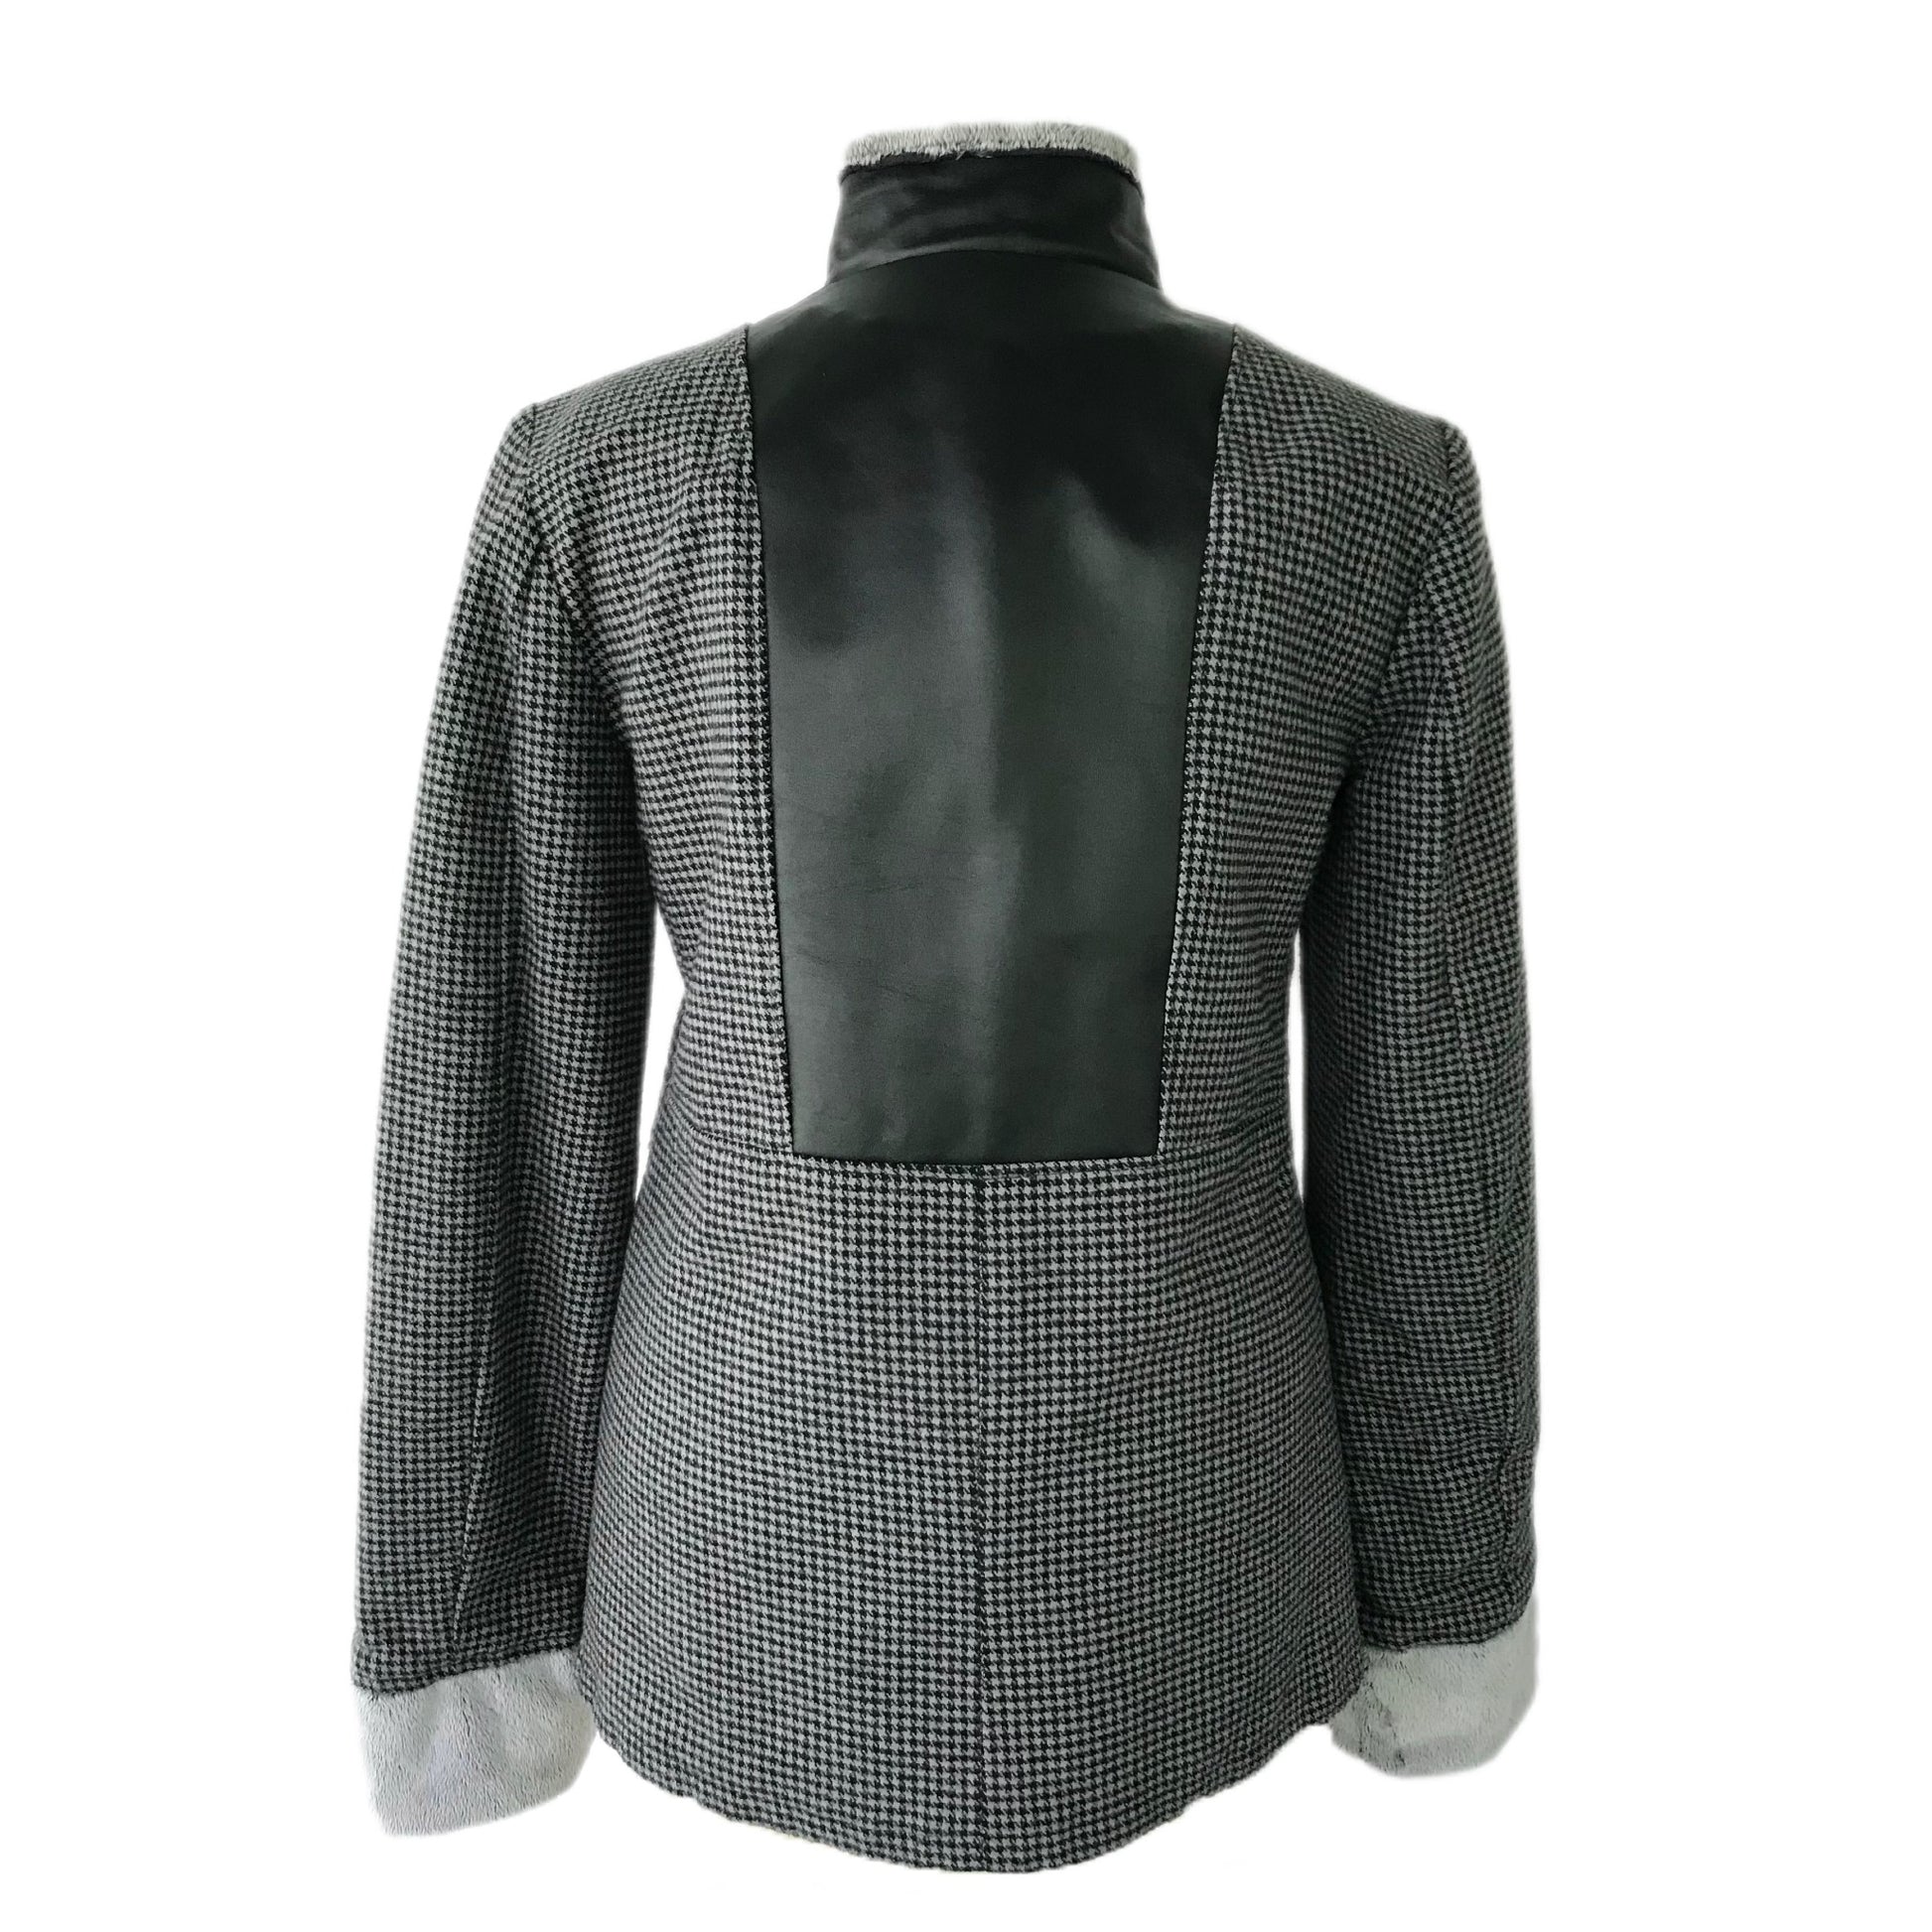 Houndstooth Women's Coat - Vegan Leather and Fur - Size Small